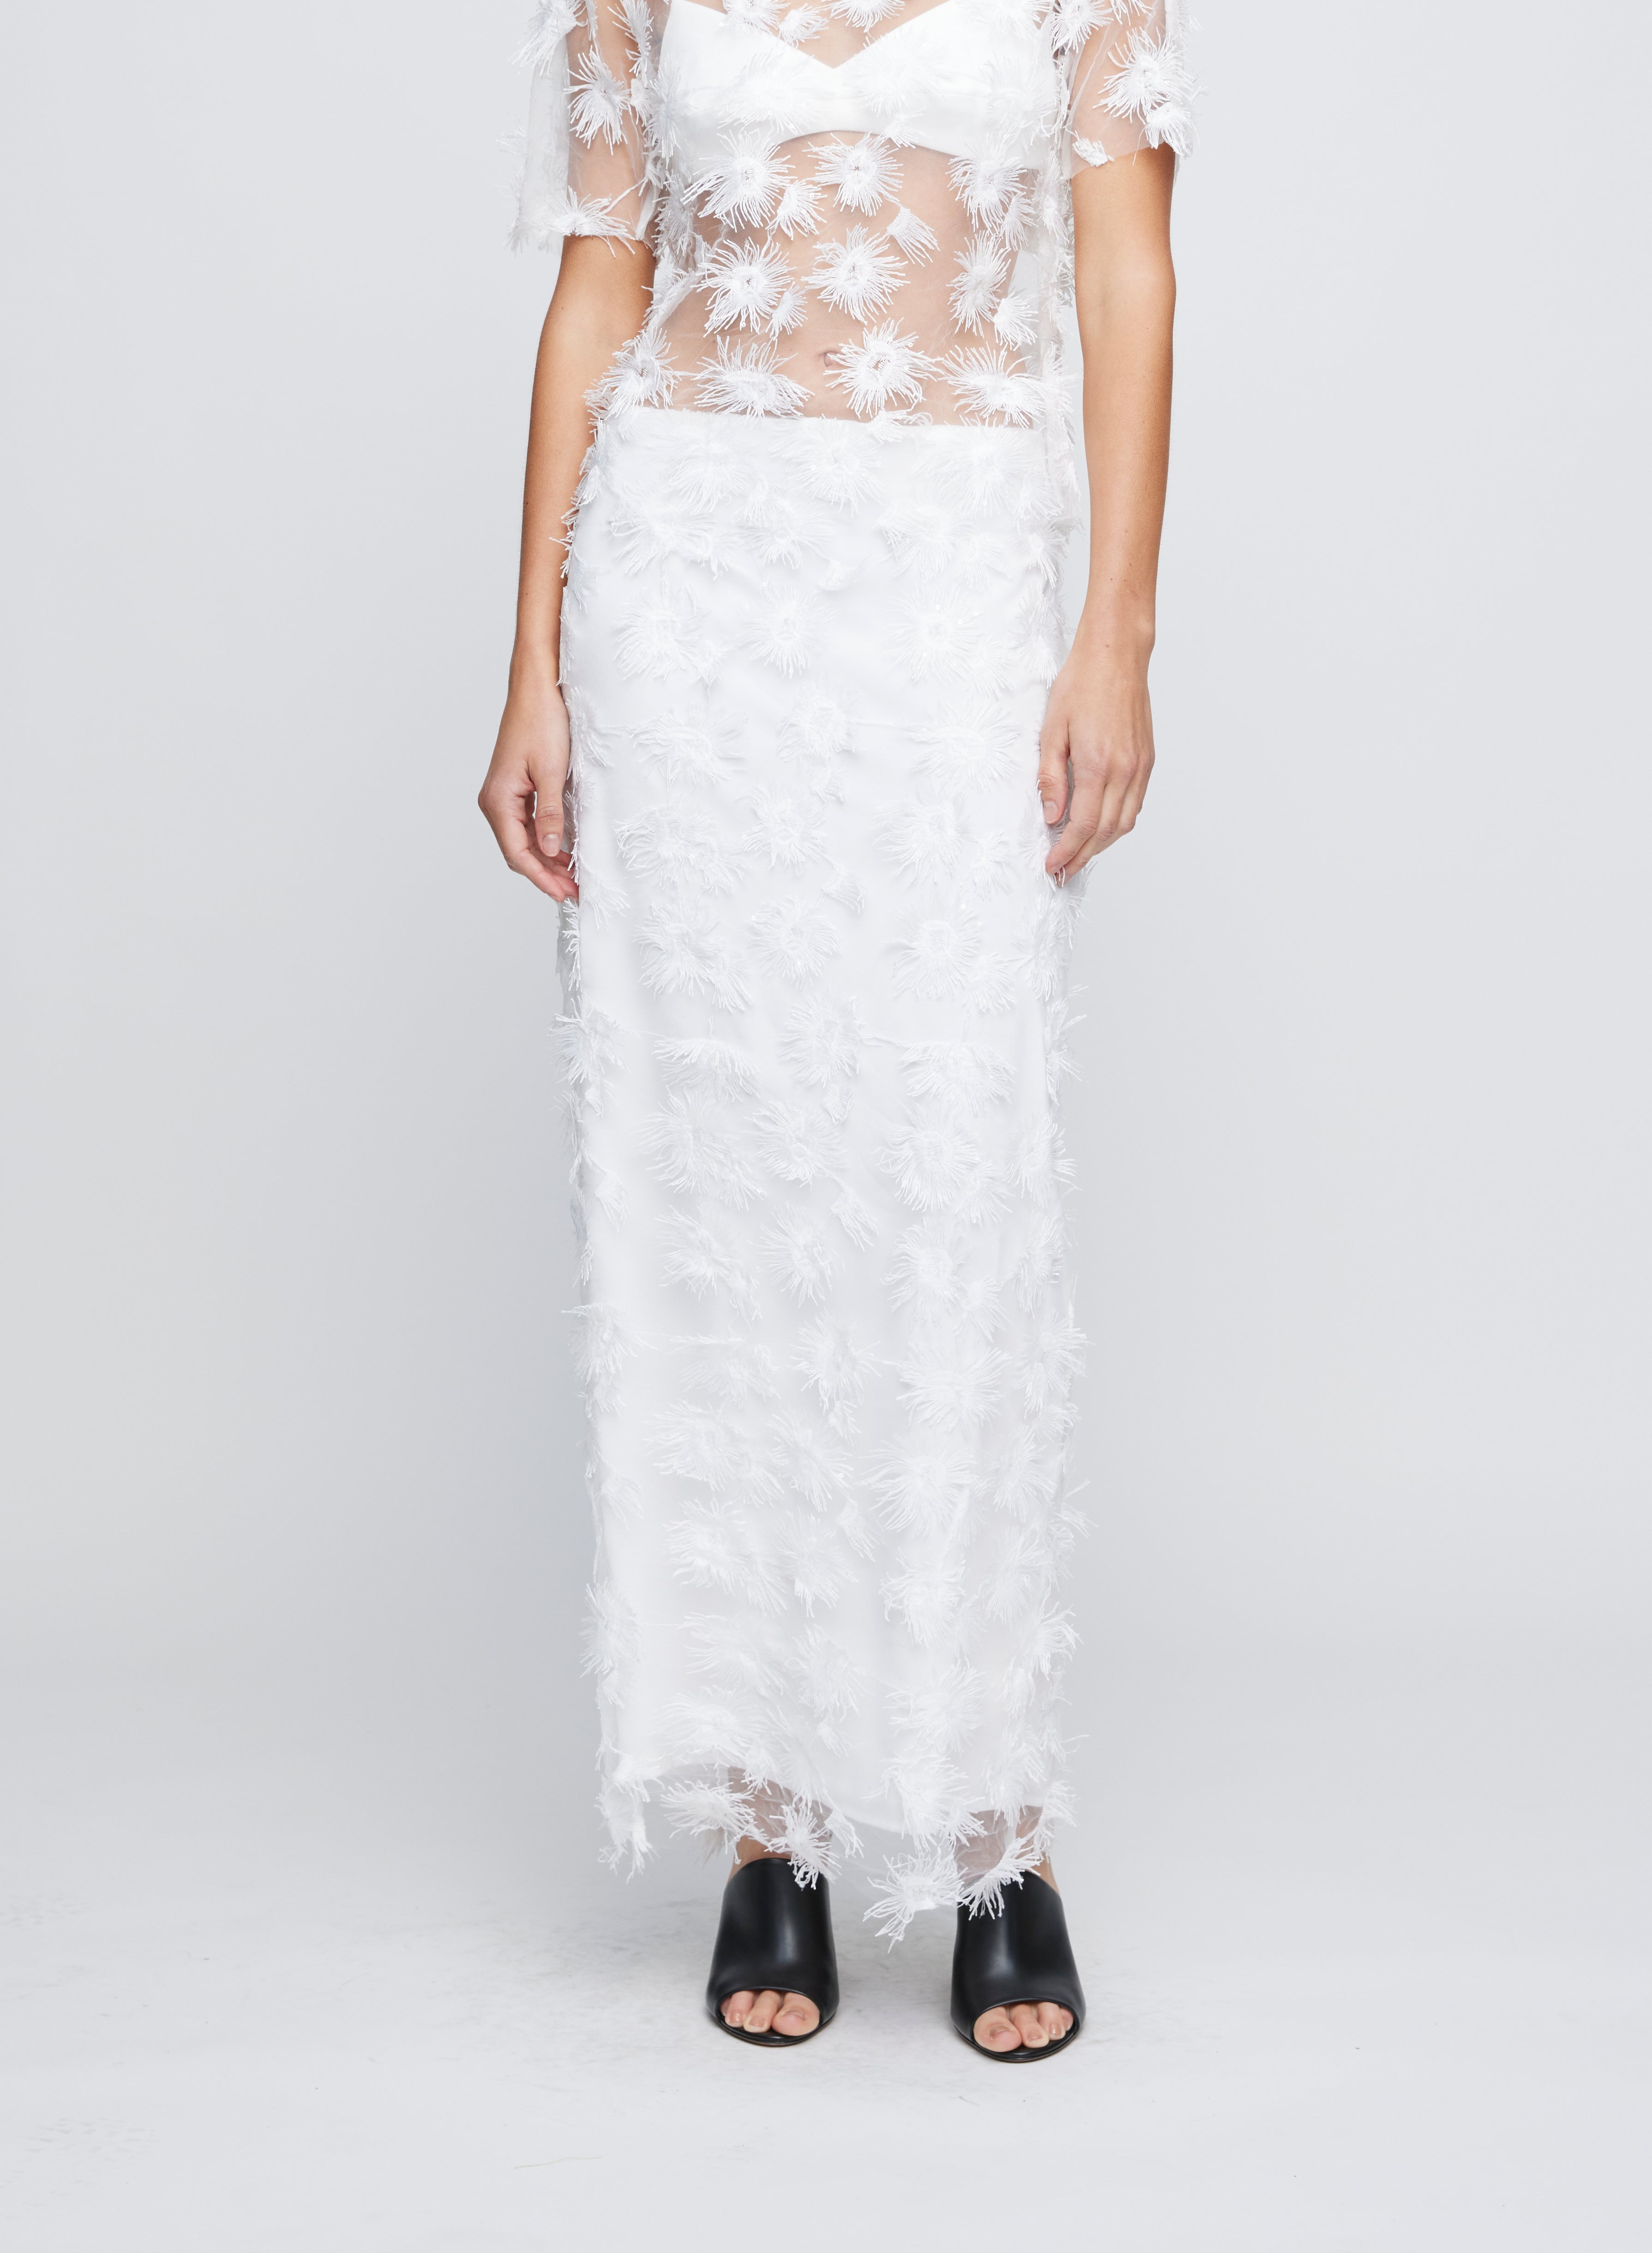 The Anna Quan Carmela Skirt in Dandelion is the perfect romantic occasion piece that sits mid to high on the waist and cut in a a sheer fabric with applique detailing.